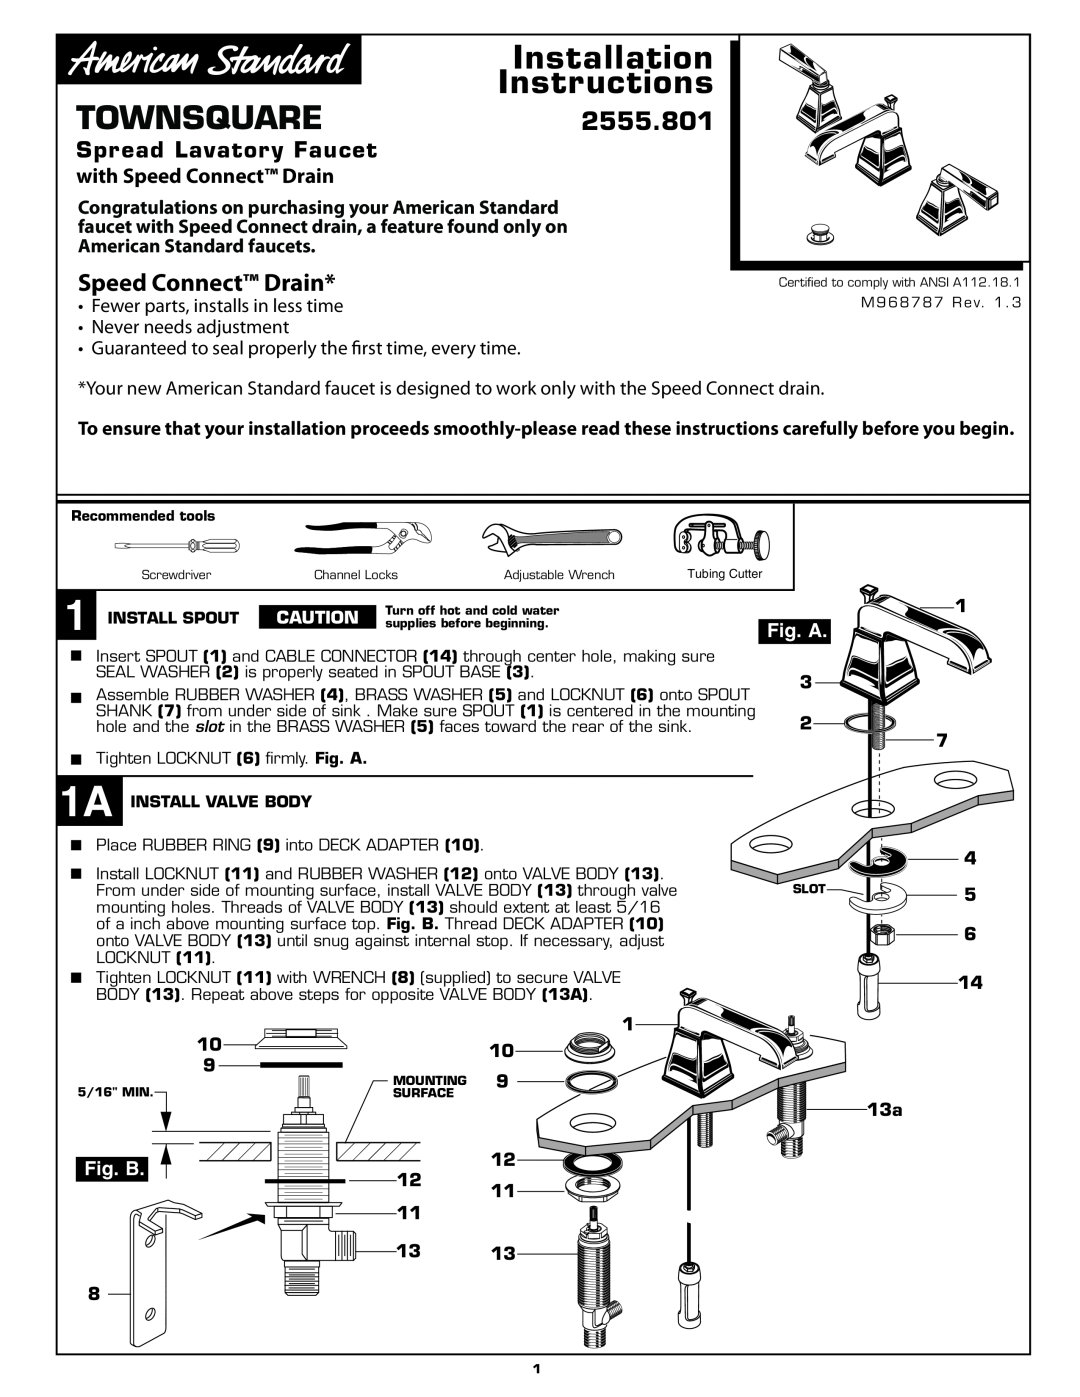 American Standard 2555.801 installation instructions Spread Lavatory Faucet, with Speed Connect Drain, Townsquare 